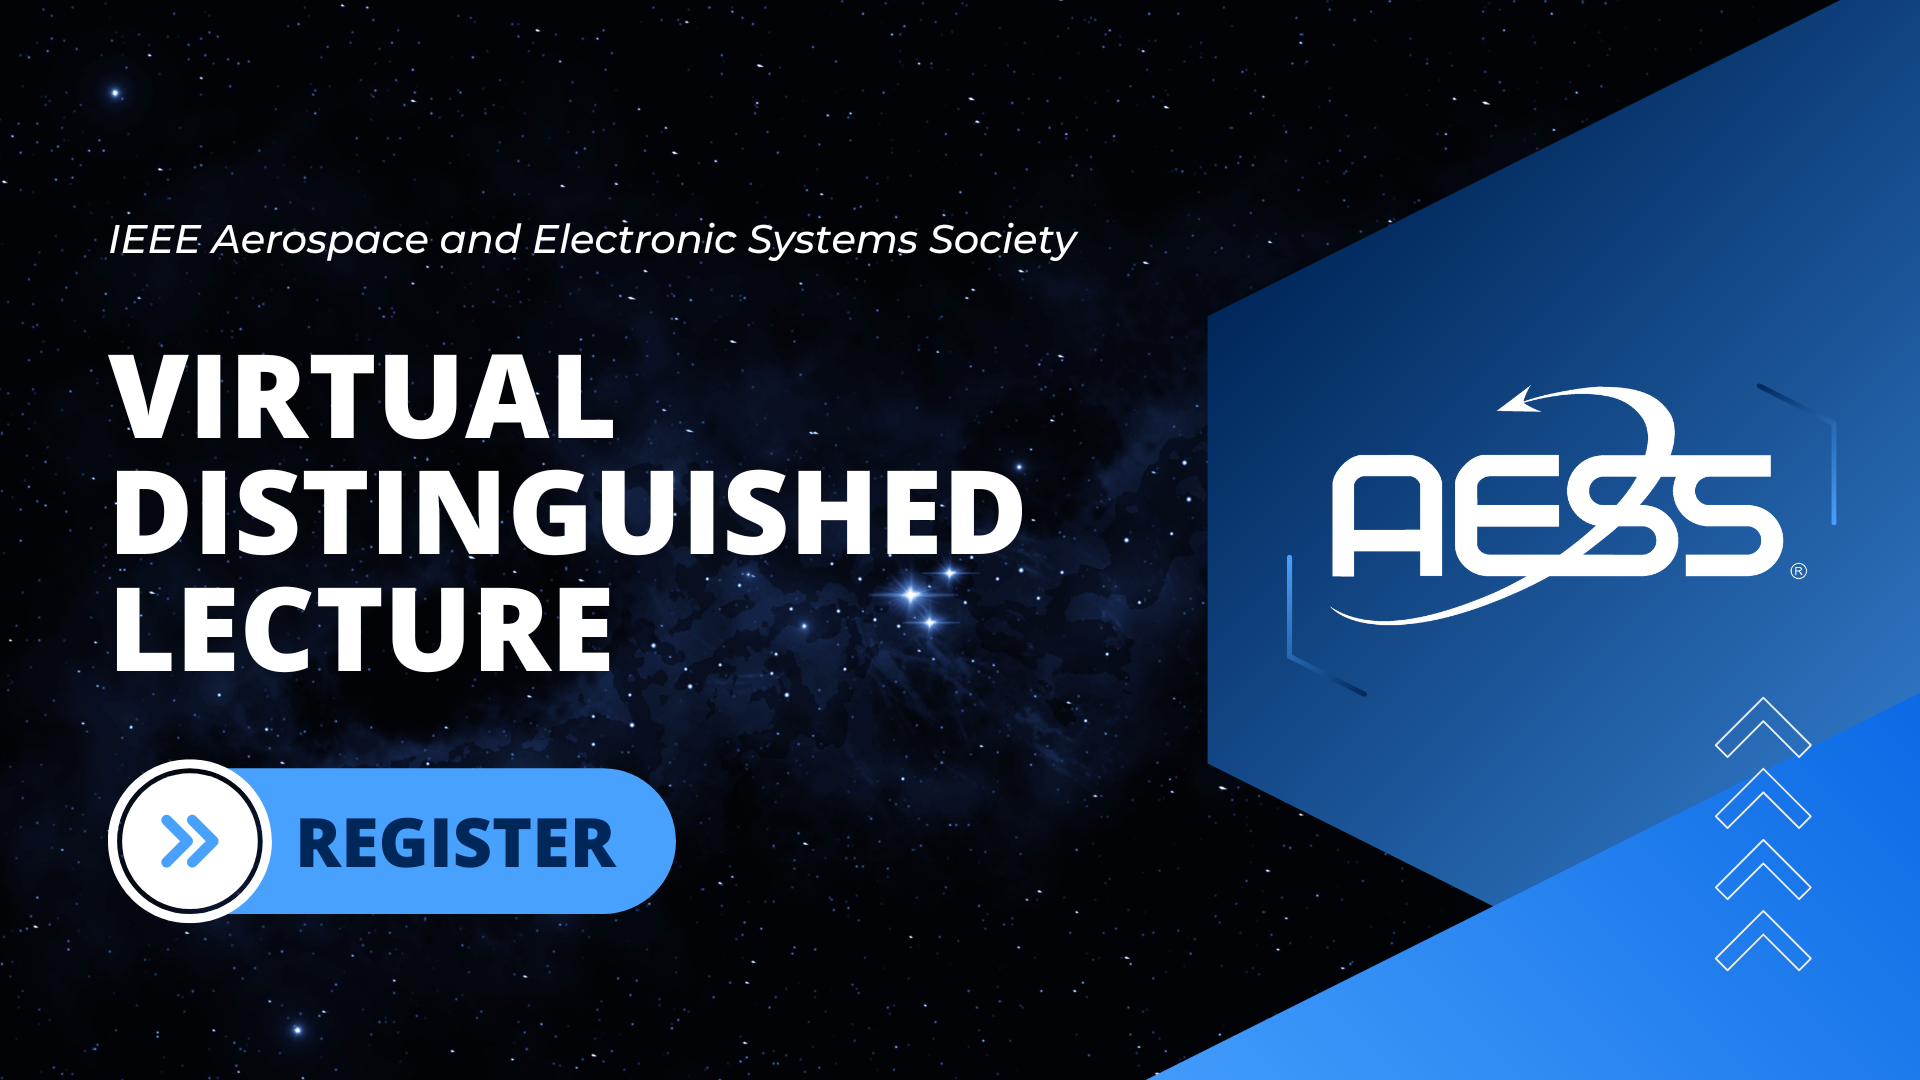 AESS Virtual Distinguished Lecture: Evolving Cyber Systems in Avionics